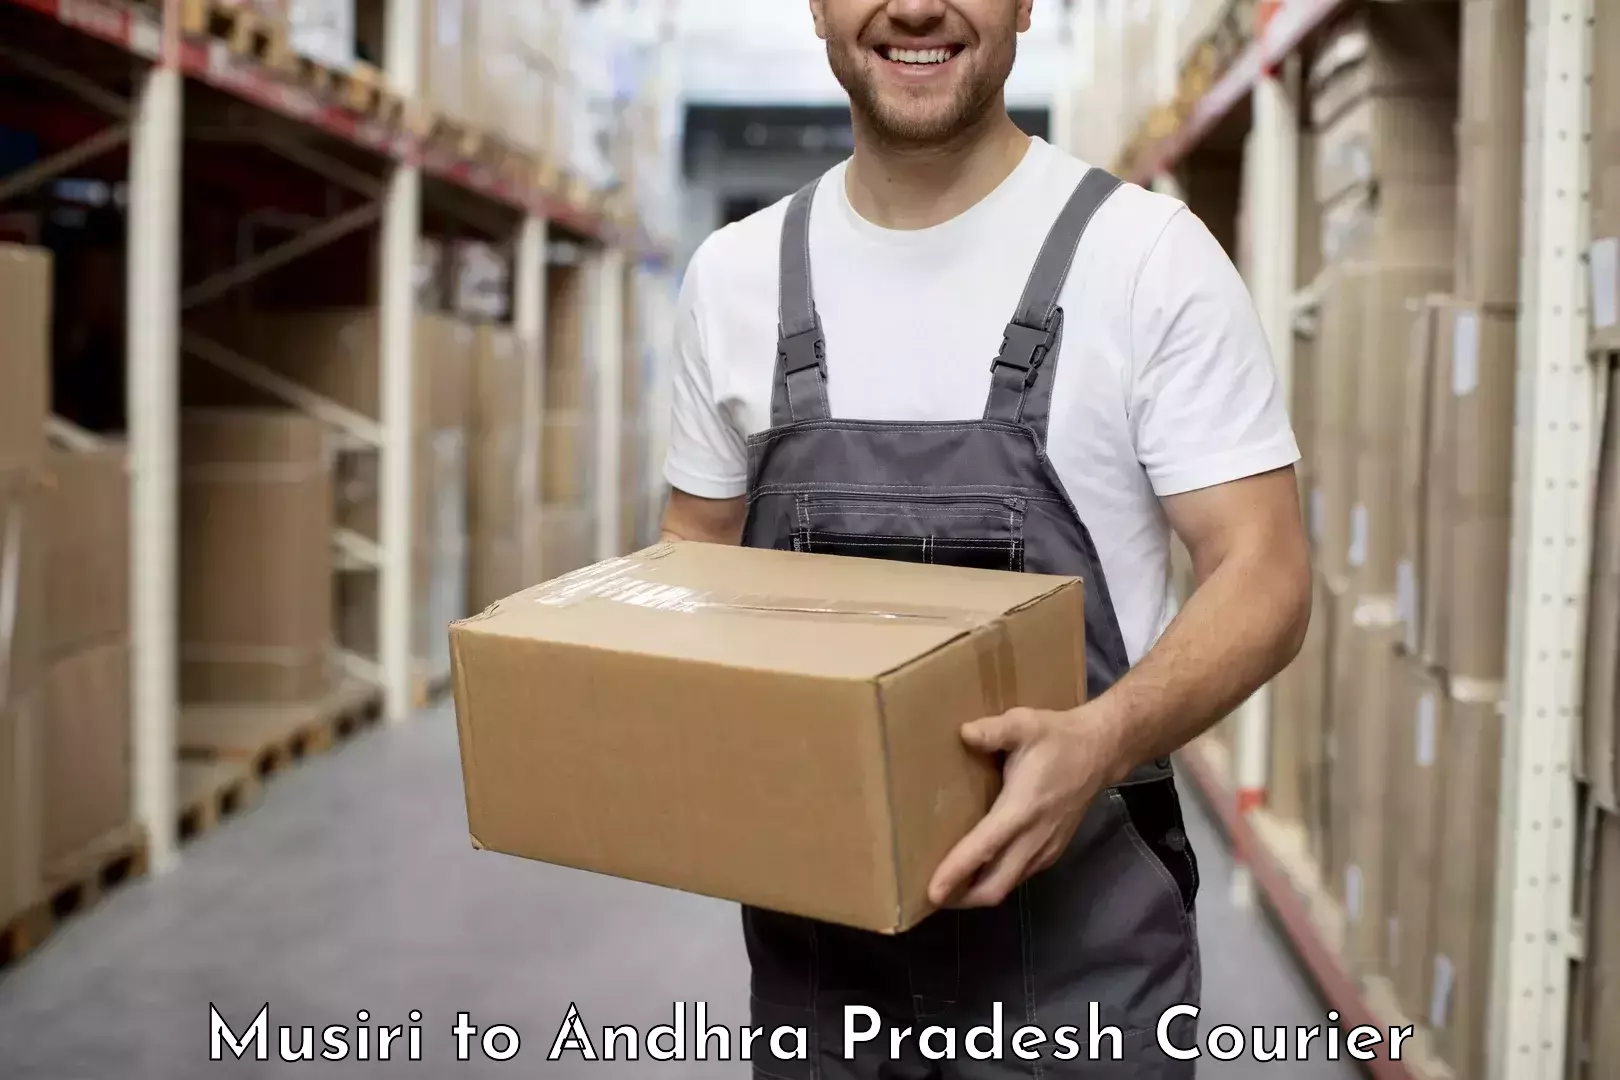 Courier service innovation in Musiri to Cuddapah